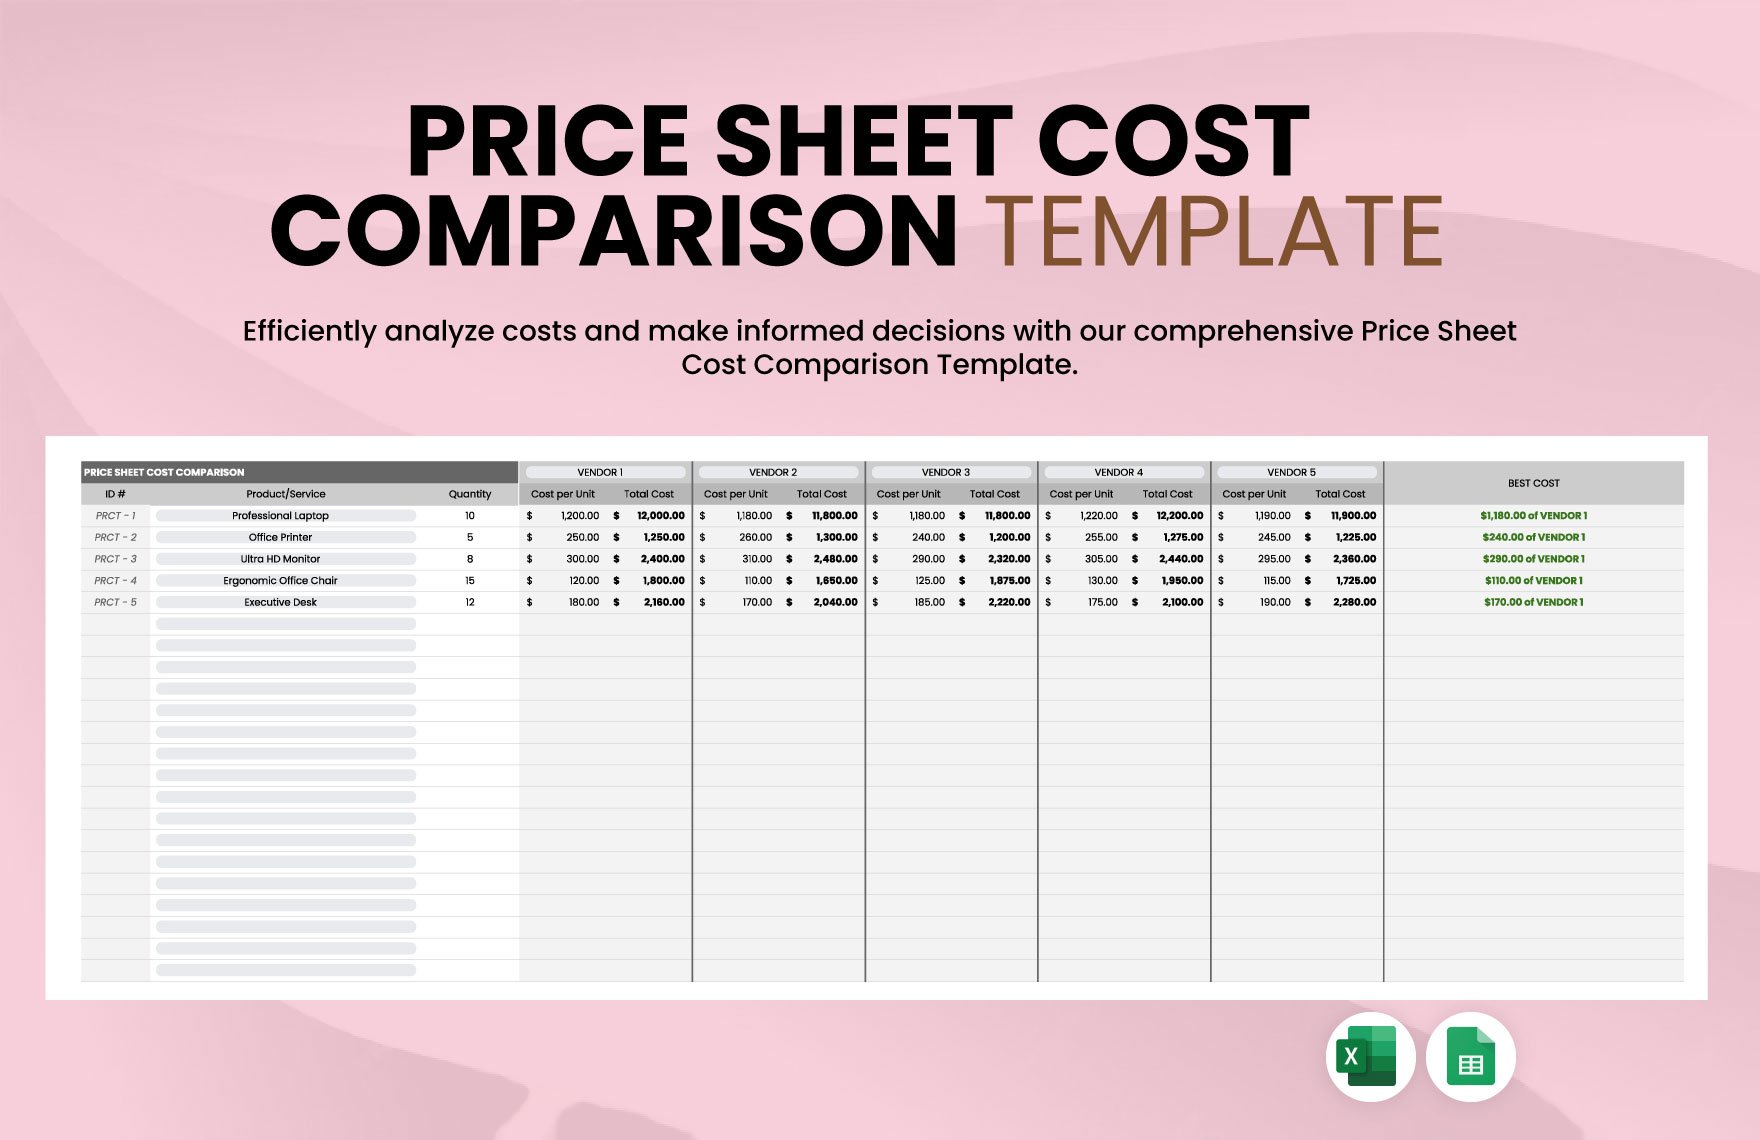 Price Sheet Cost Comparison Template in Excel, Google Sheets